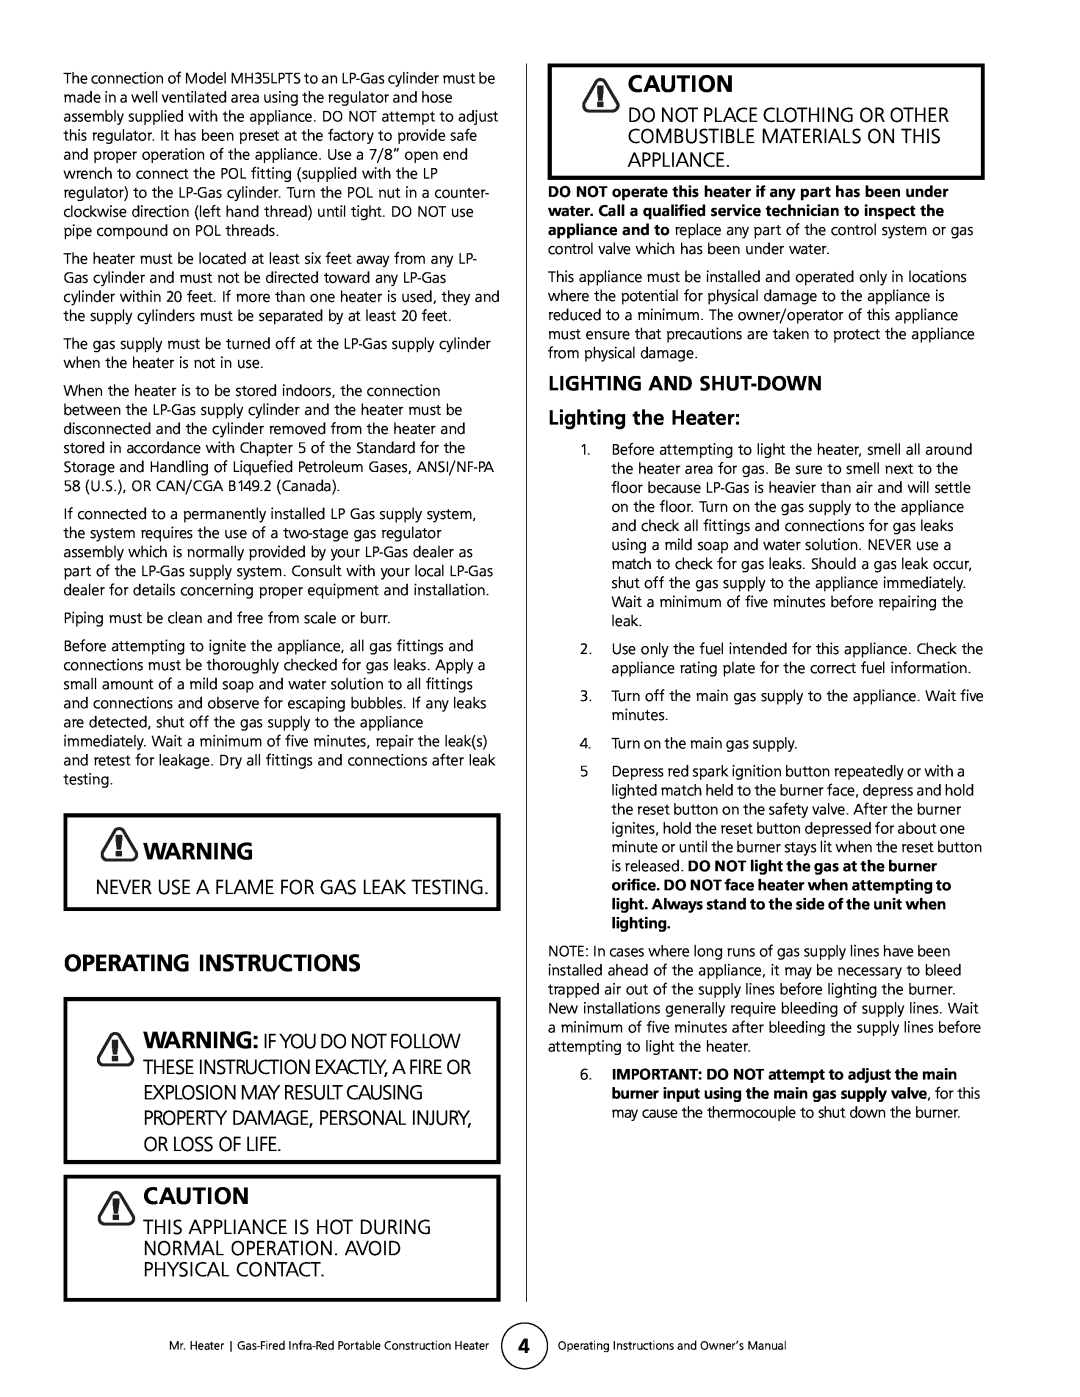 Mr. Heater MH35LPTS owner manual Operating Instructions, LIGHTING AND SHUT-DOWN Lighting the Heater 